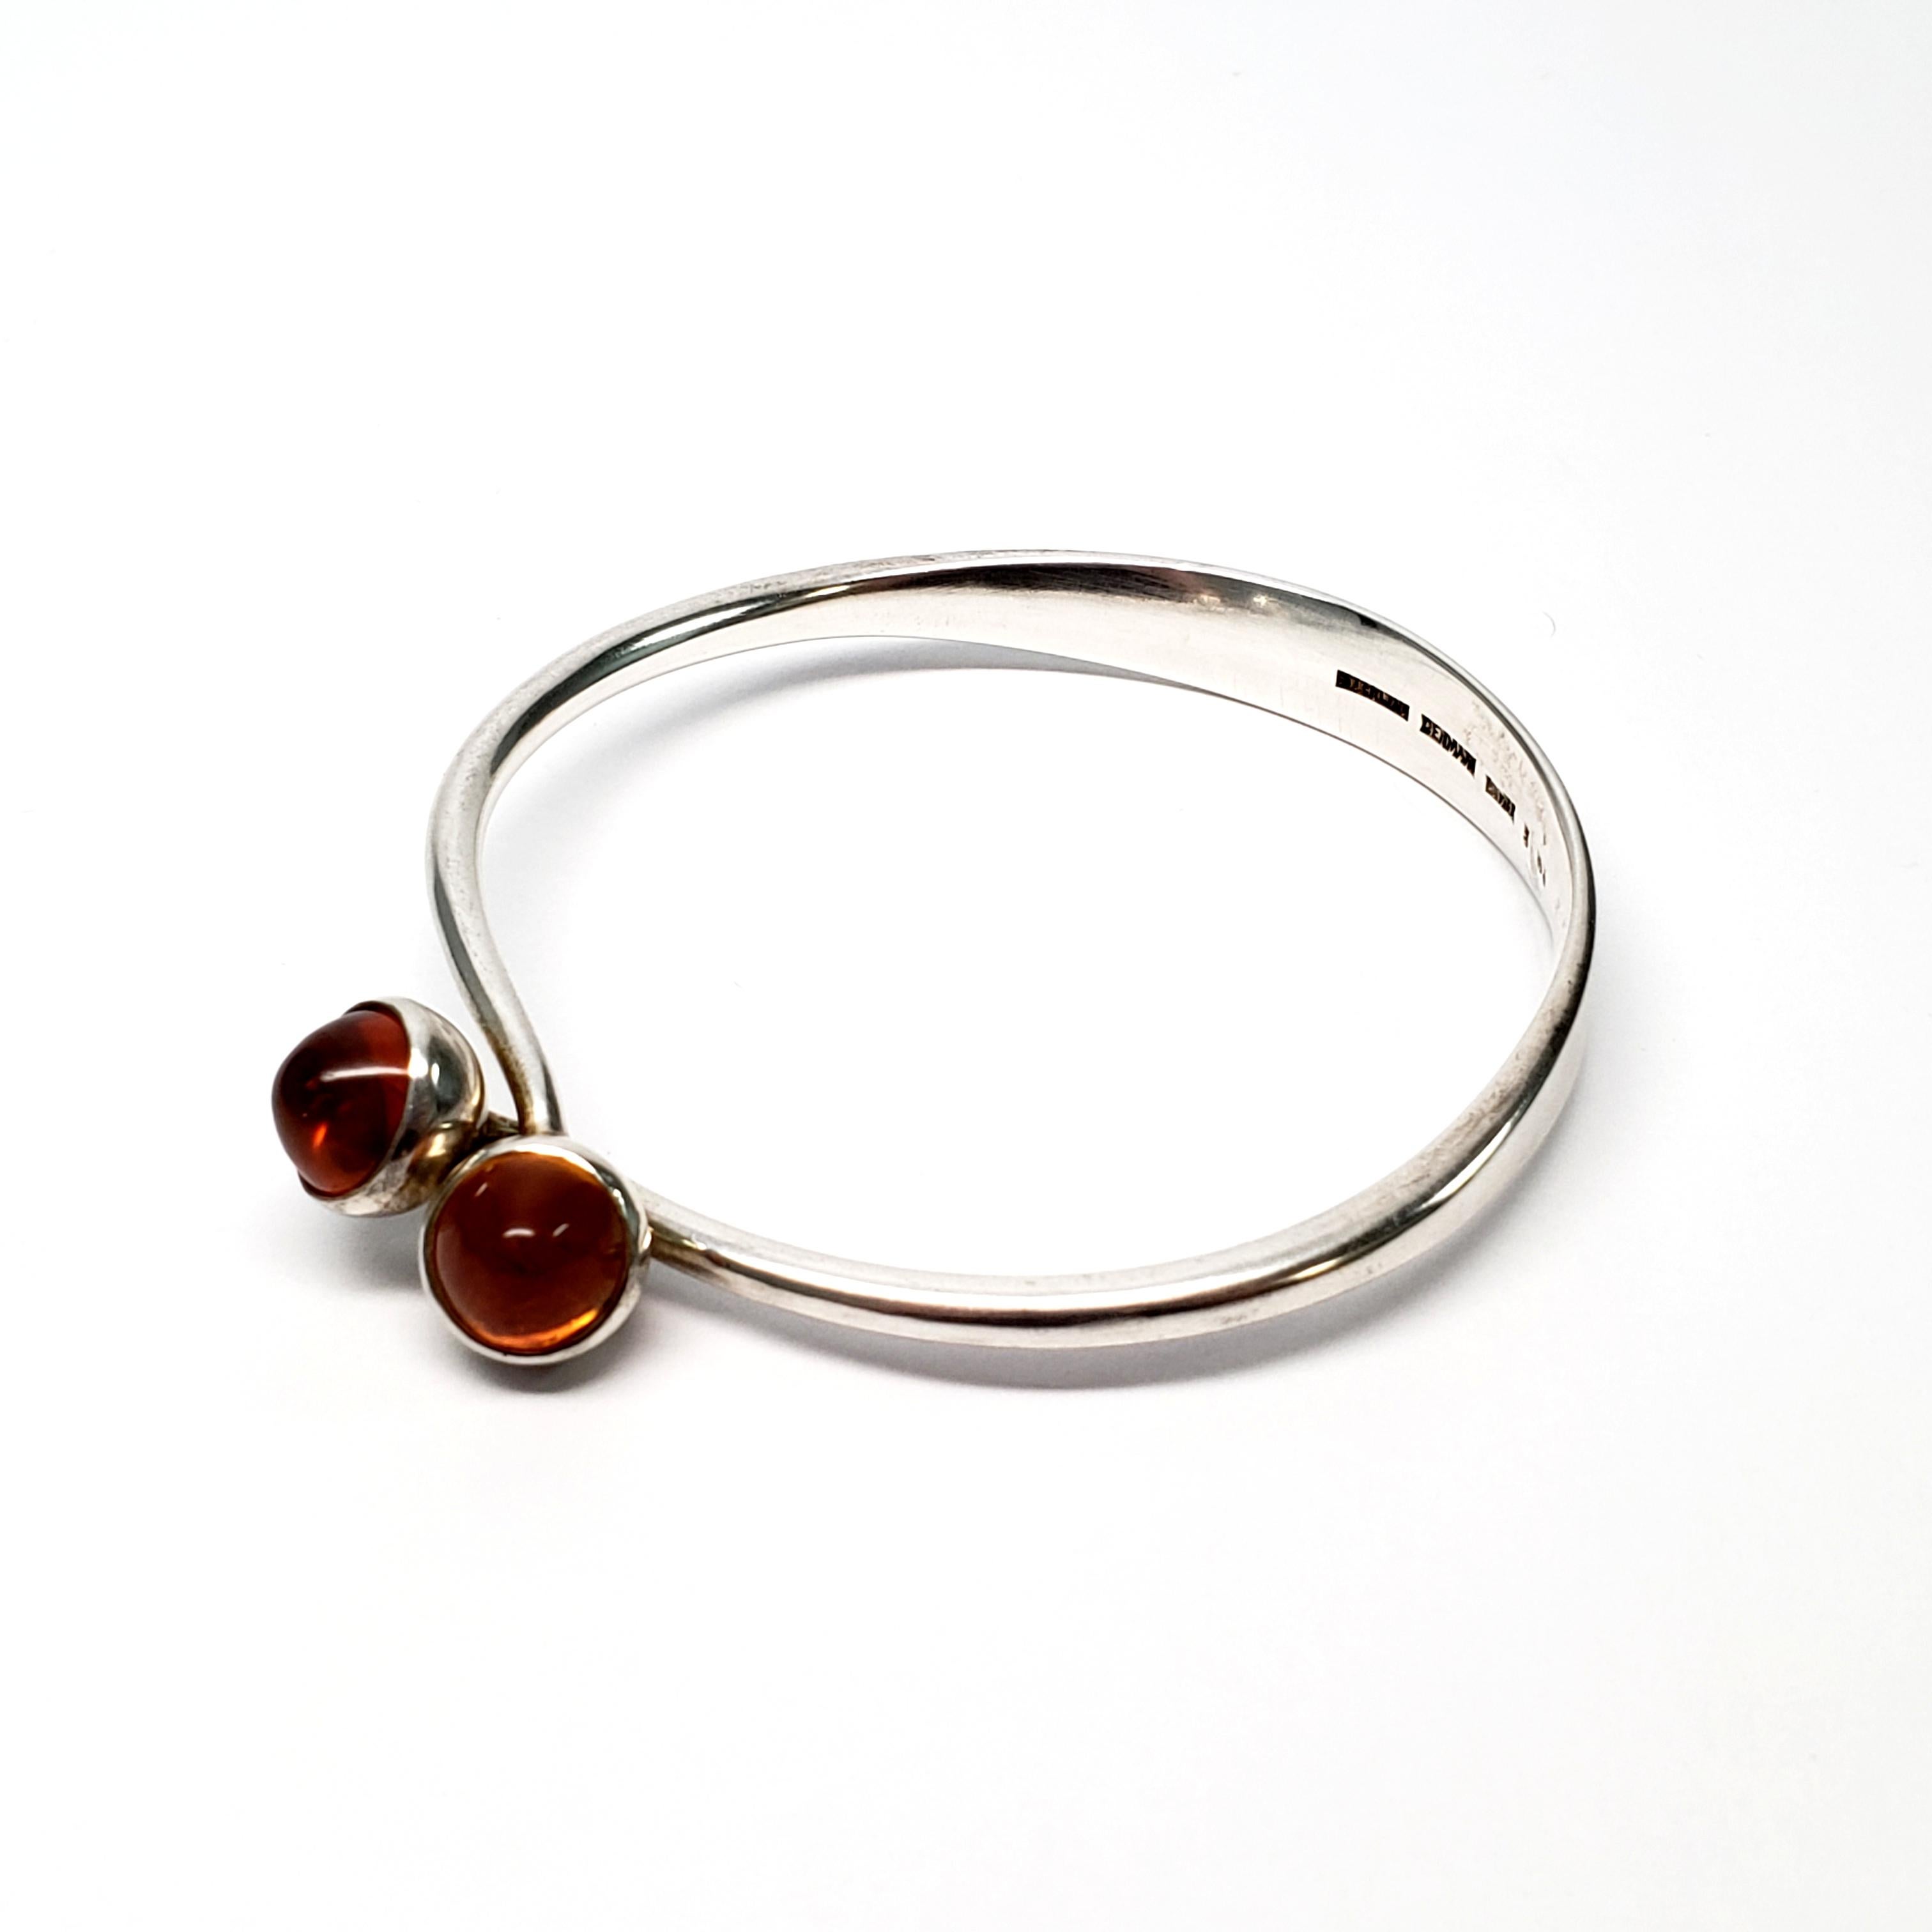 Vintage Bent Knudsen sterling silver and amber cabochon bangle bracelet.

Interlocking sterling silver bangle bracelet, by Bent Knudsen of Denmark, featuring 2 round, high set amber cabochons. Circa 1956.

Size: measures 7 3/4